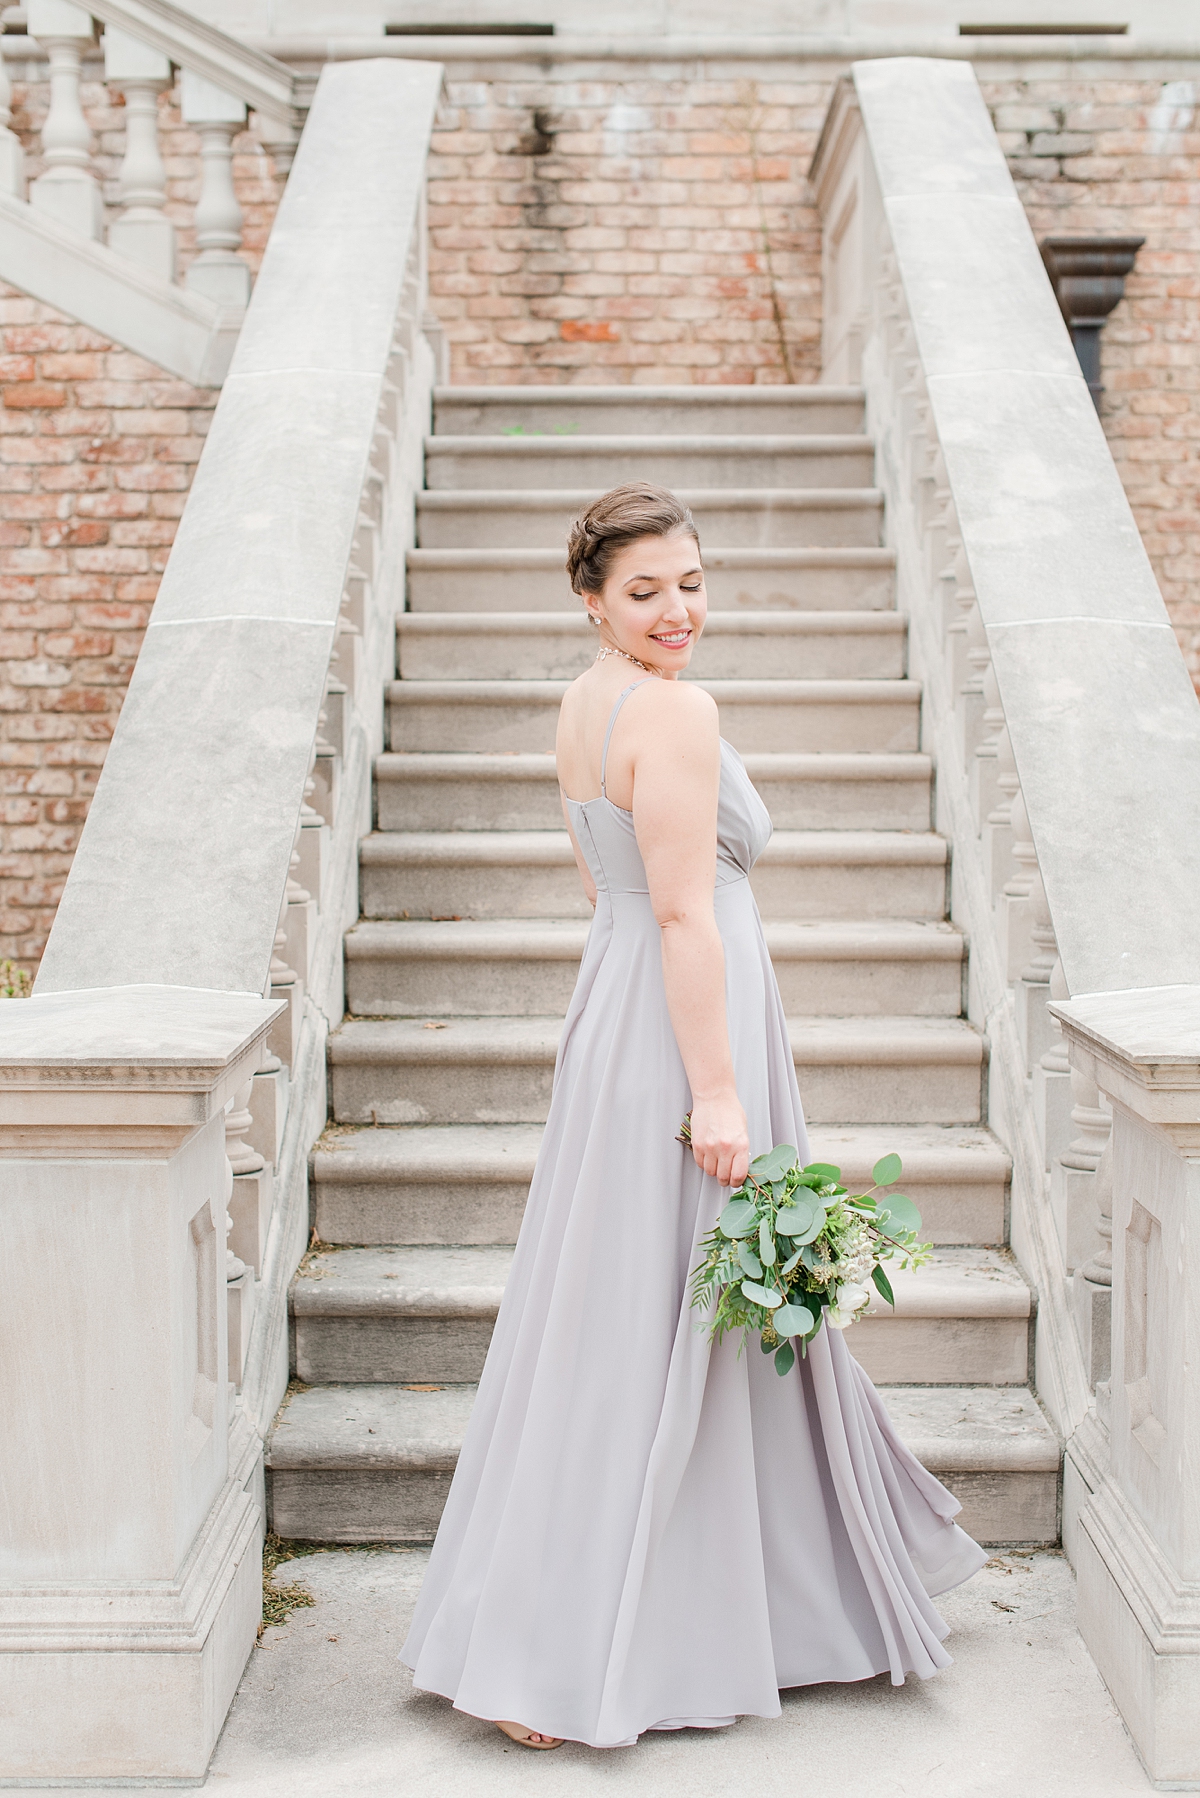 Bridesmaid Portrait with flowing dress  at a Timeless Grace Estate Winery Wedding. Wedding Photography by Richmond Wedding Photographer Kailey Brianne Photography.